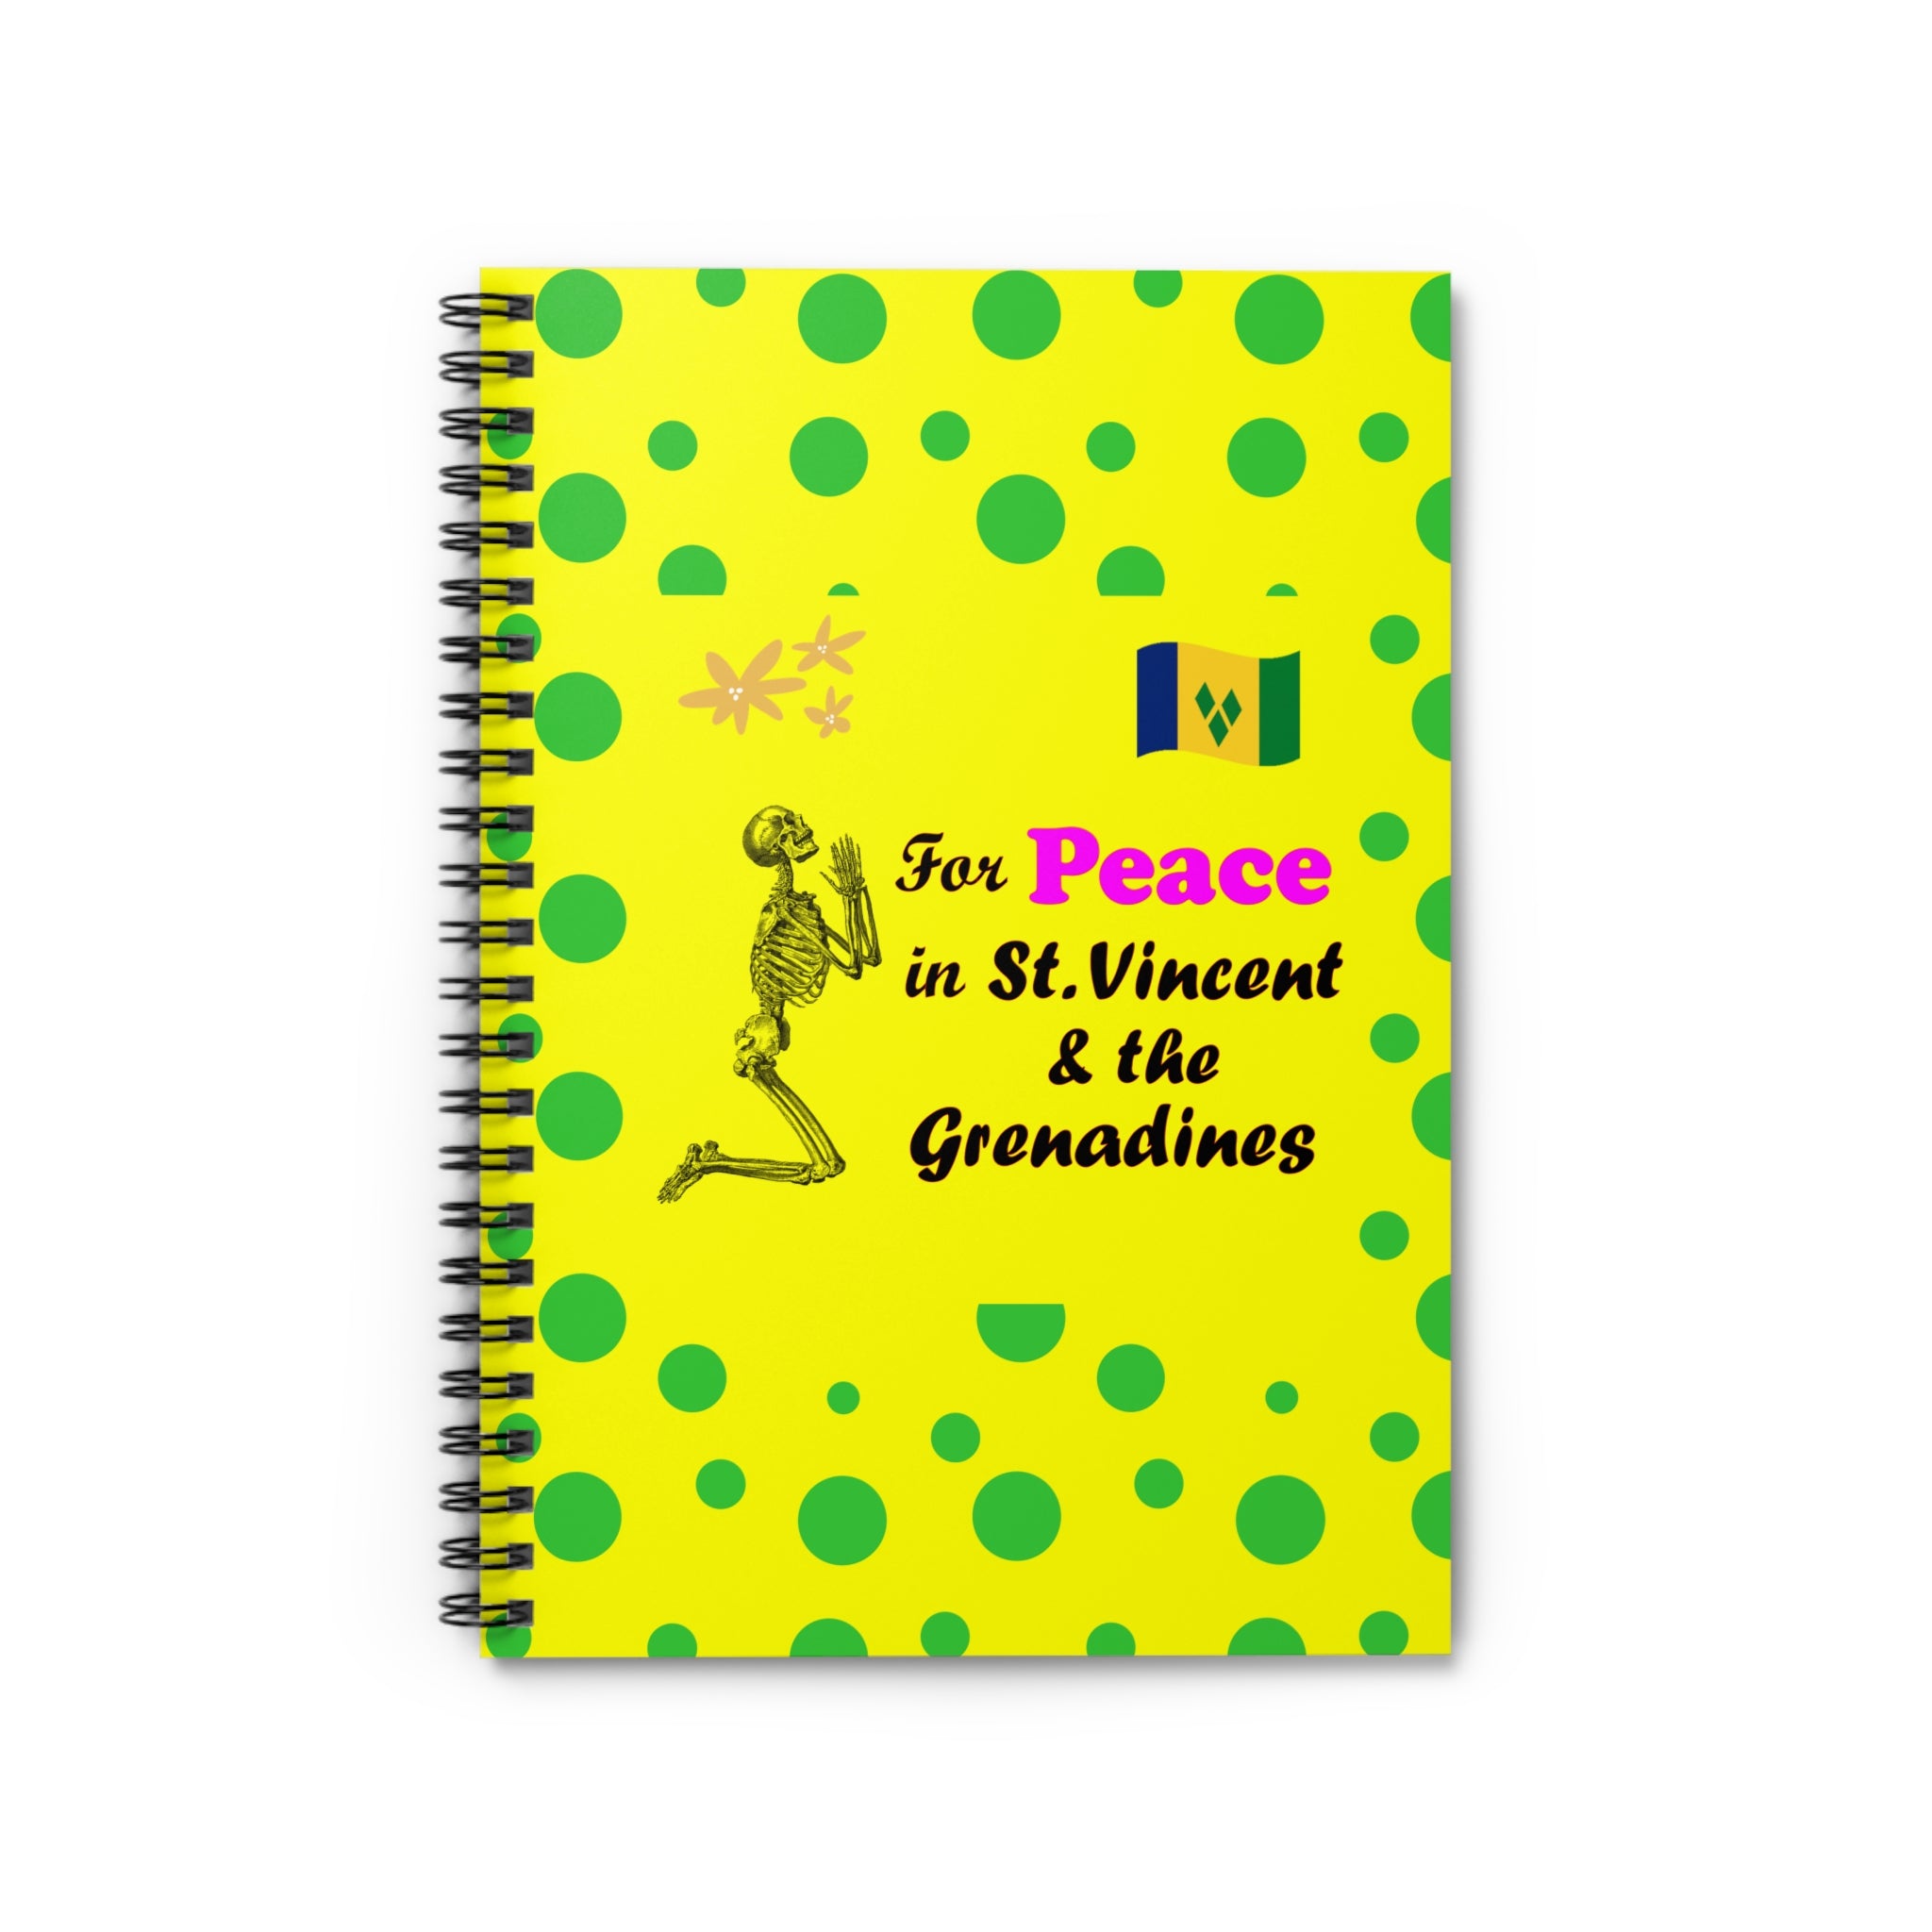 St. Vincent and the Grenadines Praying for Peace Green Spotted Yellow, Spiral Lined Notebook